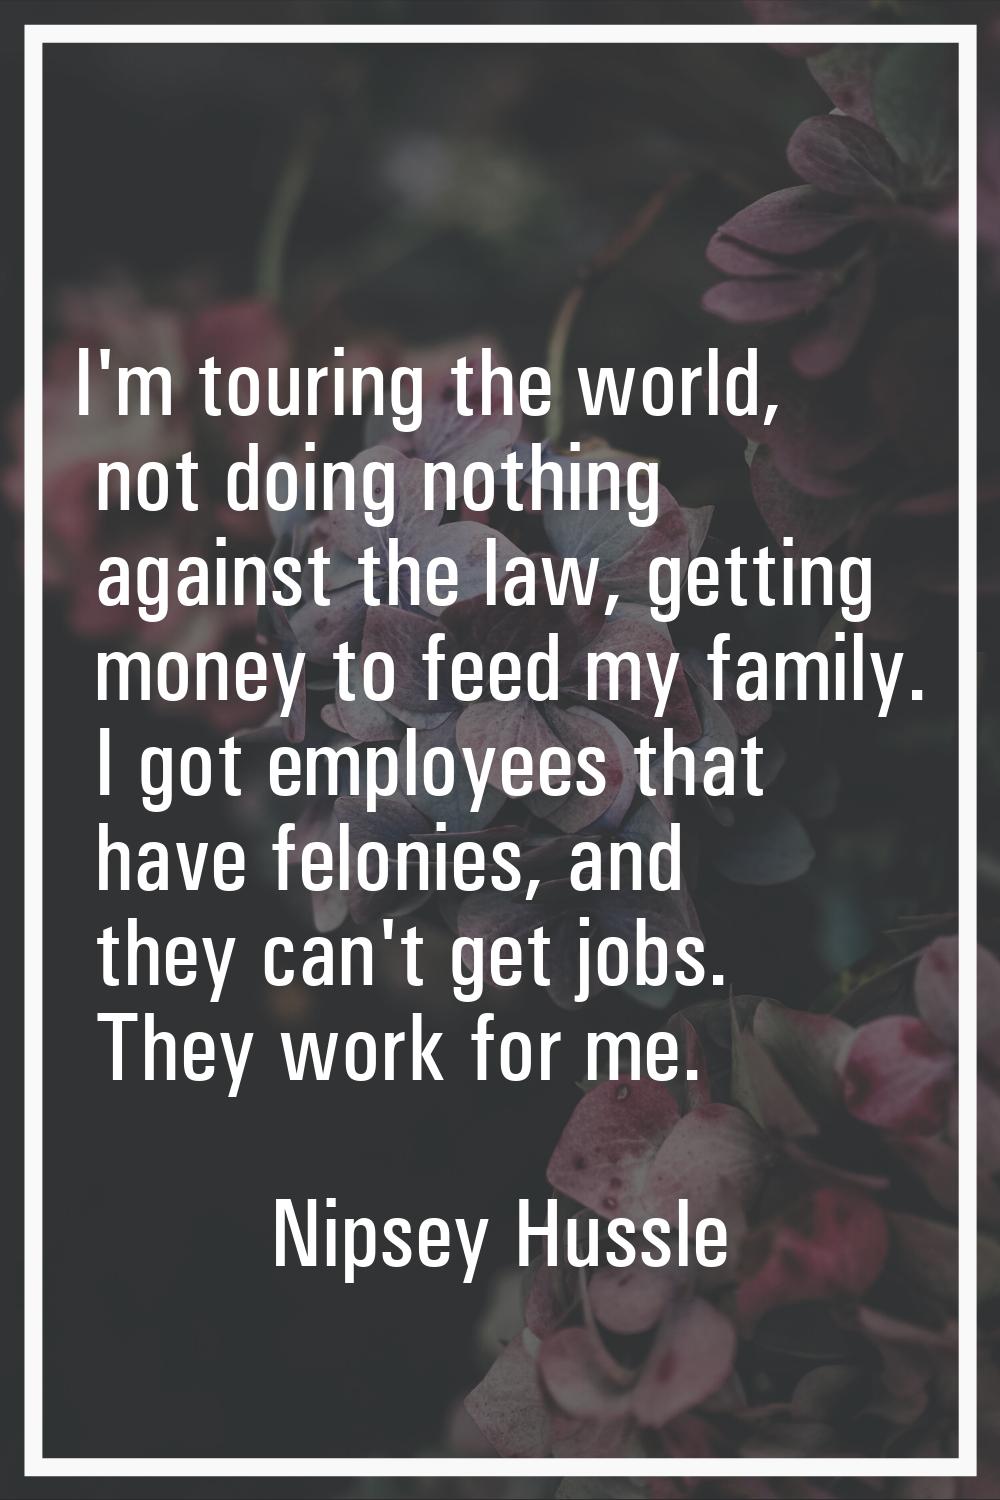 I'm touring the world, not doing nothing against the law, getting money to feed my family. I got em